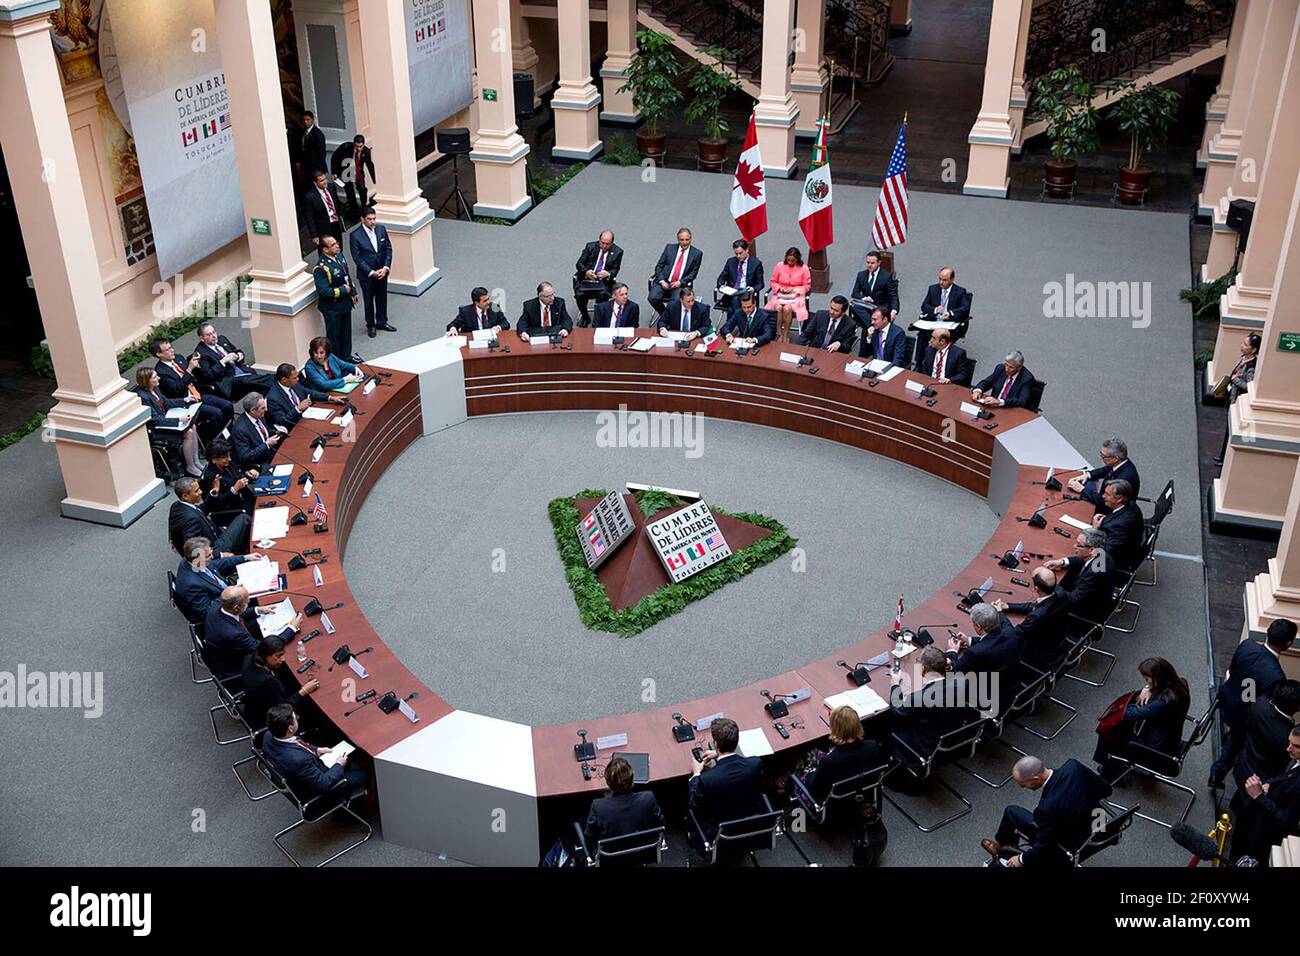 President Barack Obama meets with President Enrique Peña Nieto of Mexico and Prime Minister Stephen Harper of Canada, at the Palacio de Justicia during the North American Leaders Summit in Toluca, Mexico, Feb. 19, 2014 Stock Photo